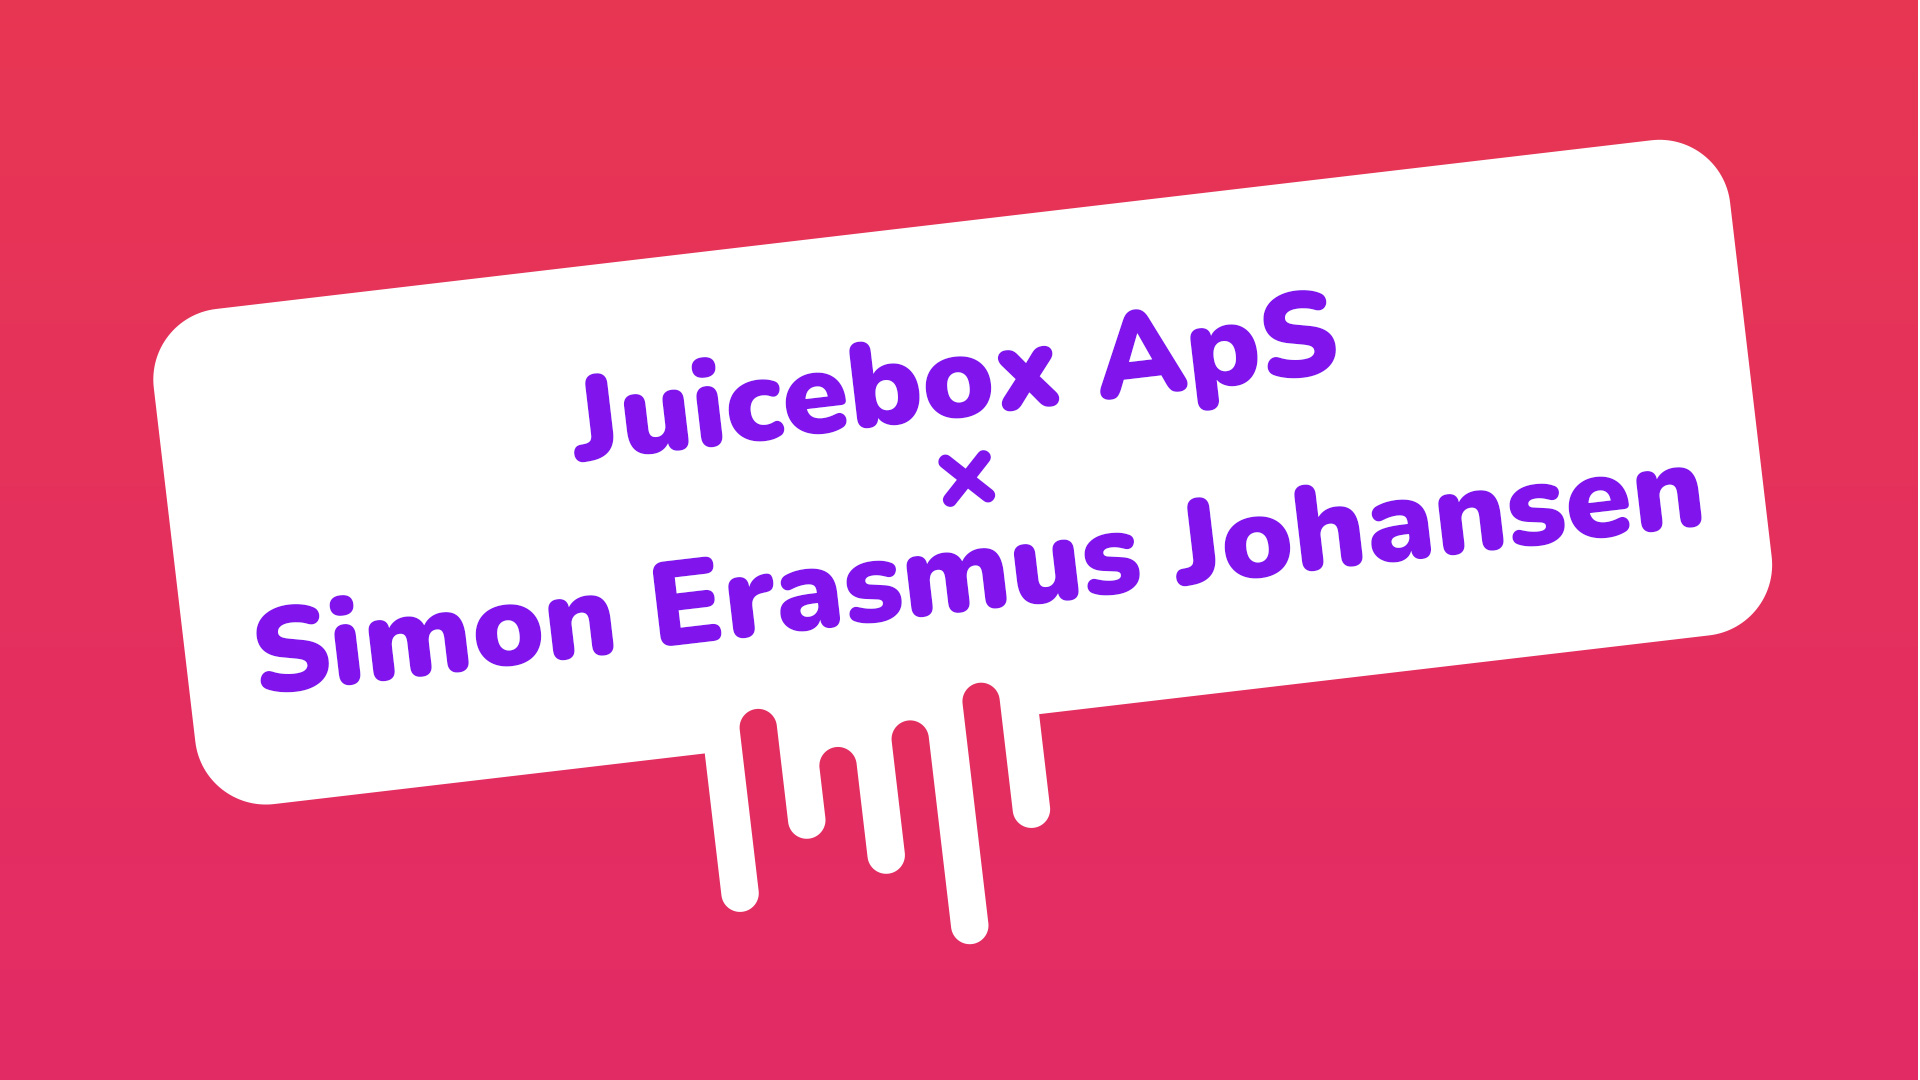 gradient background in work pink colors with a textbox with the text "Juicebox ApS x Simon Erasmus Johansen" on it